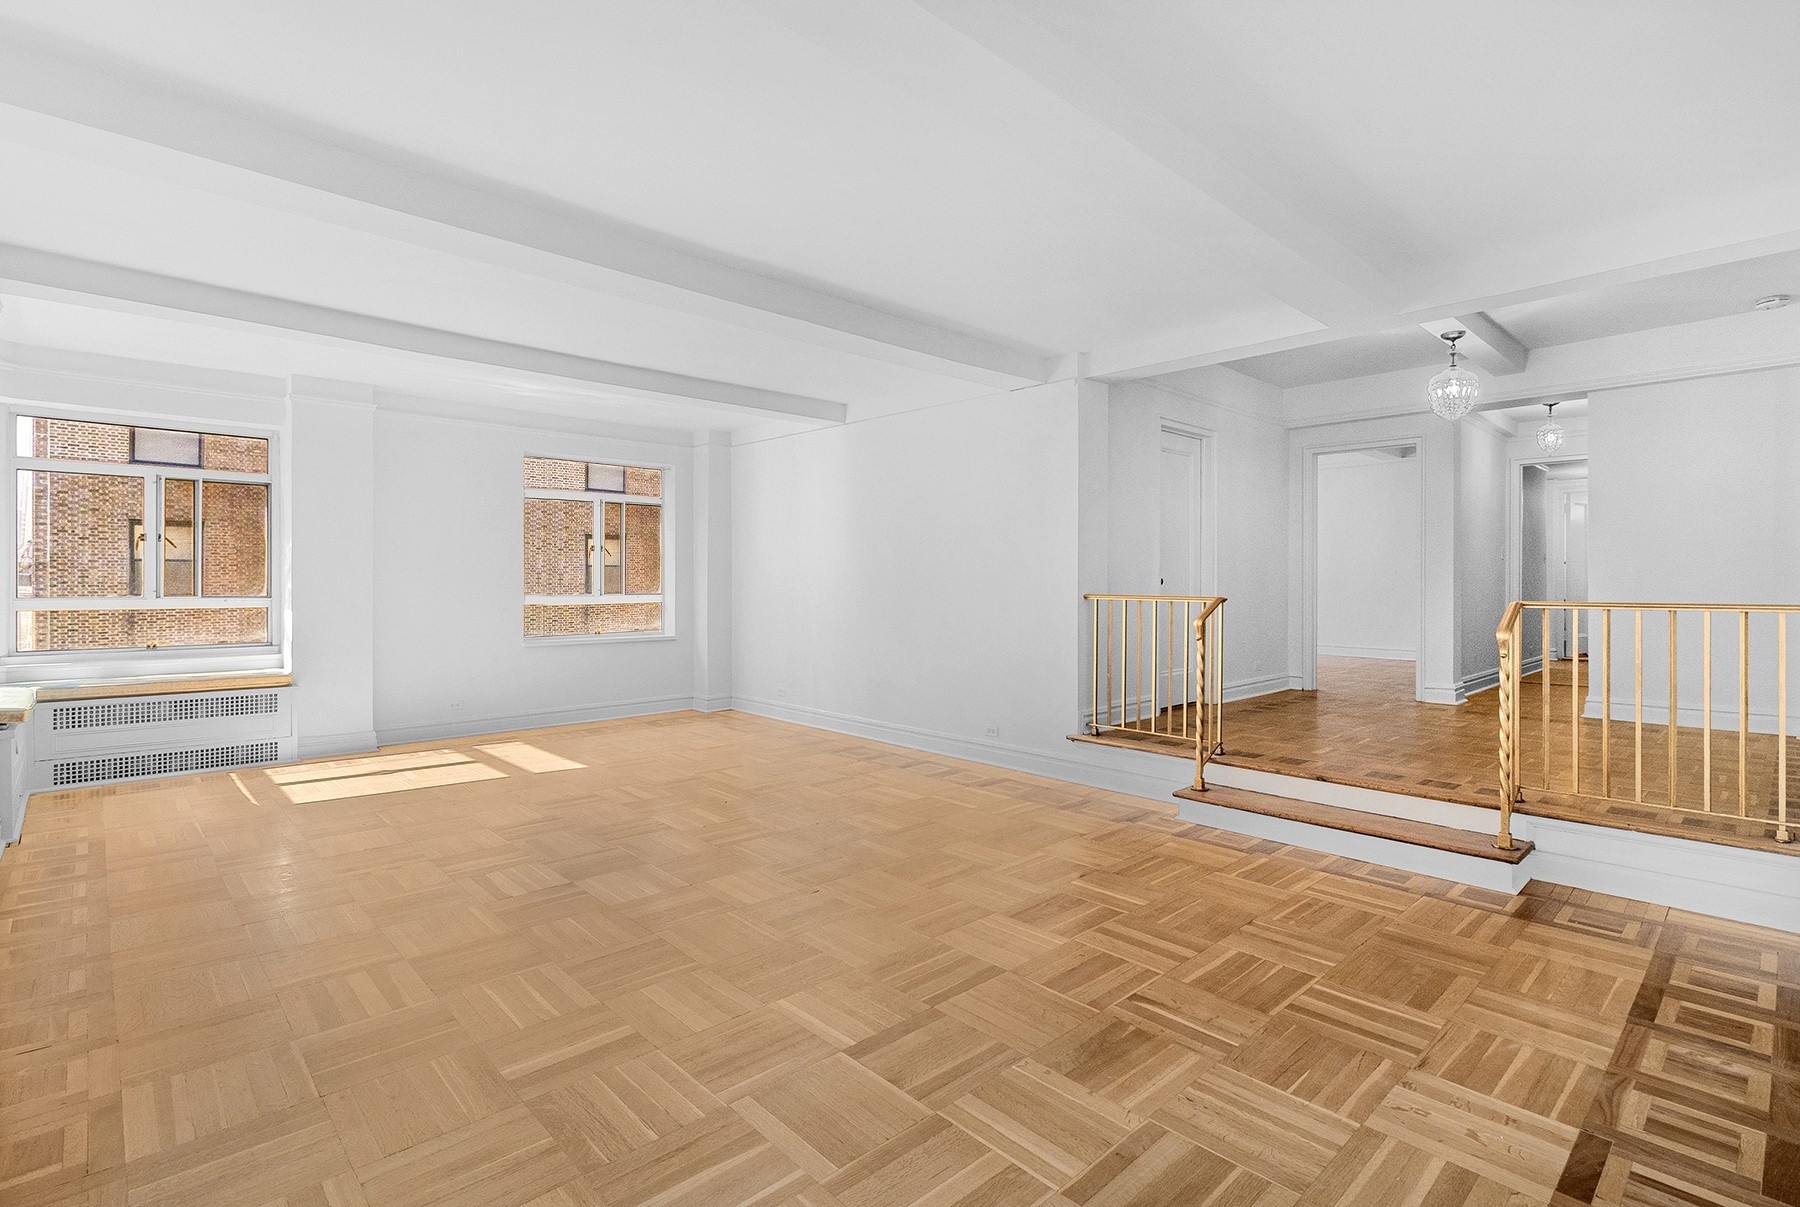 Property at 1220-26 Madison Ave, 19 E 88TH ST , 9A Carnegie Hill, New York, New York 10128